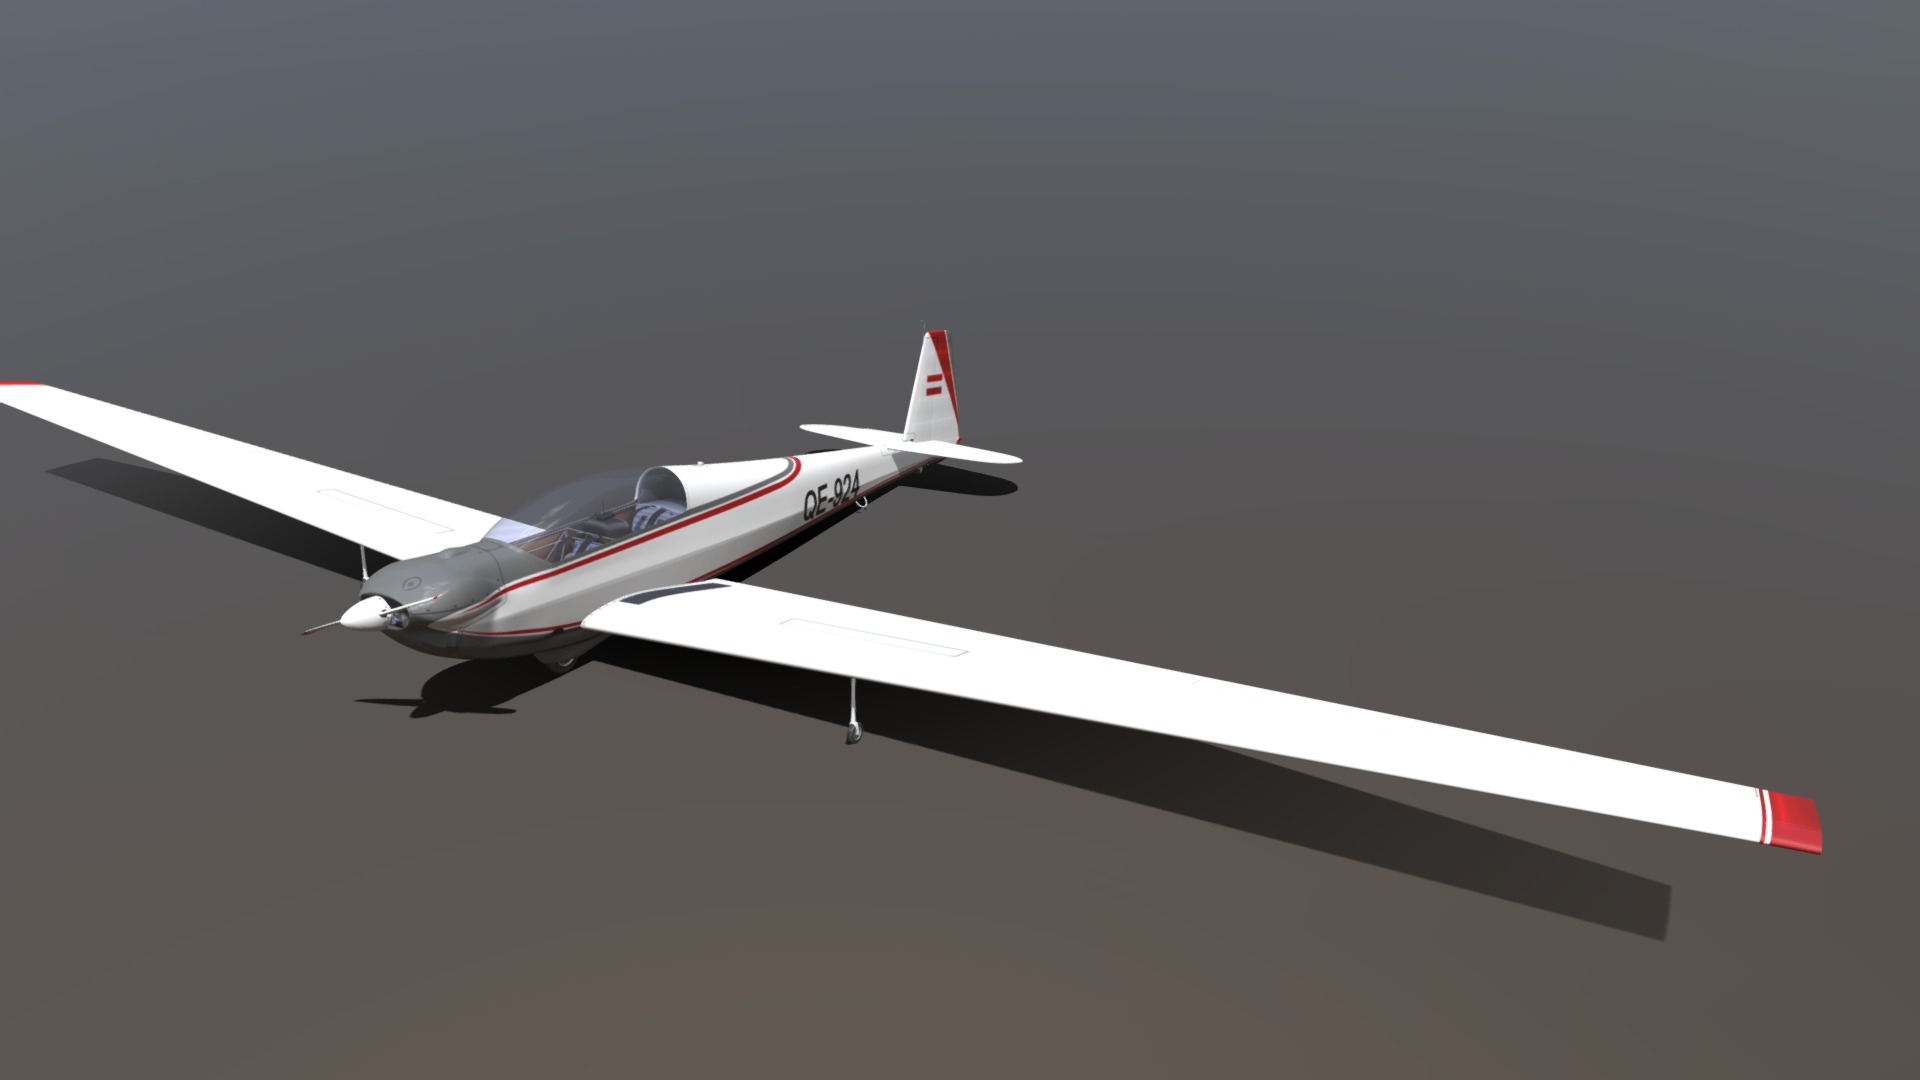 3D model Falke SF-28 Motorglider - This is a 3D model of the Falke SF-28 Motorglider. The 3D model is about a white airplane flying.